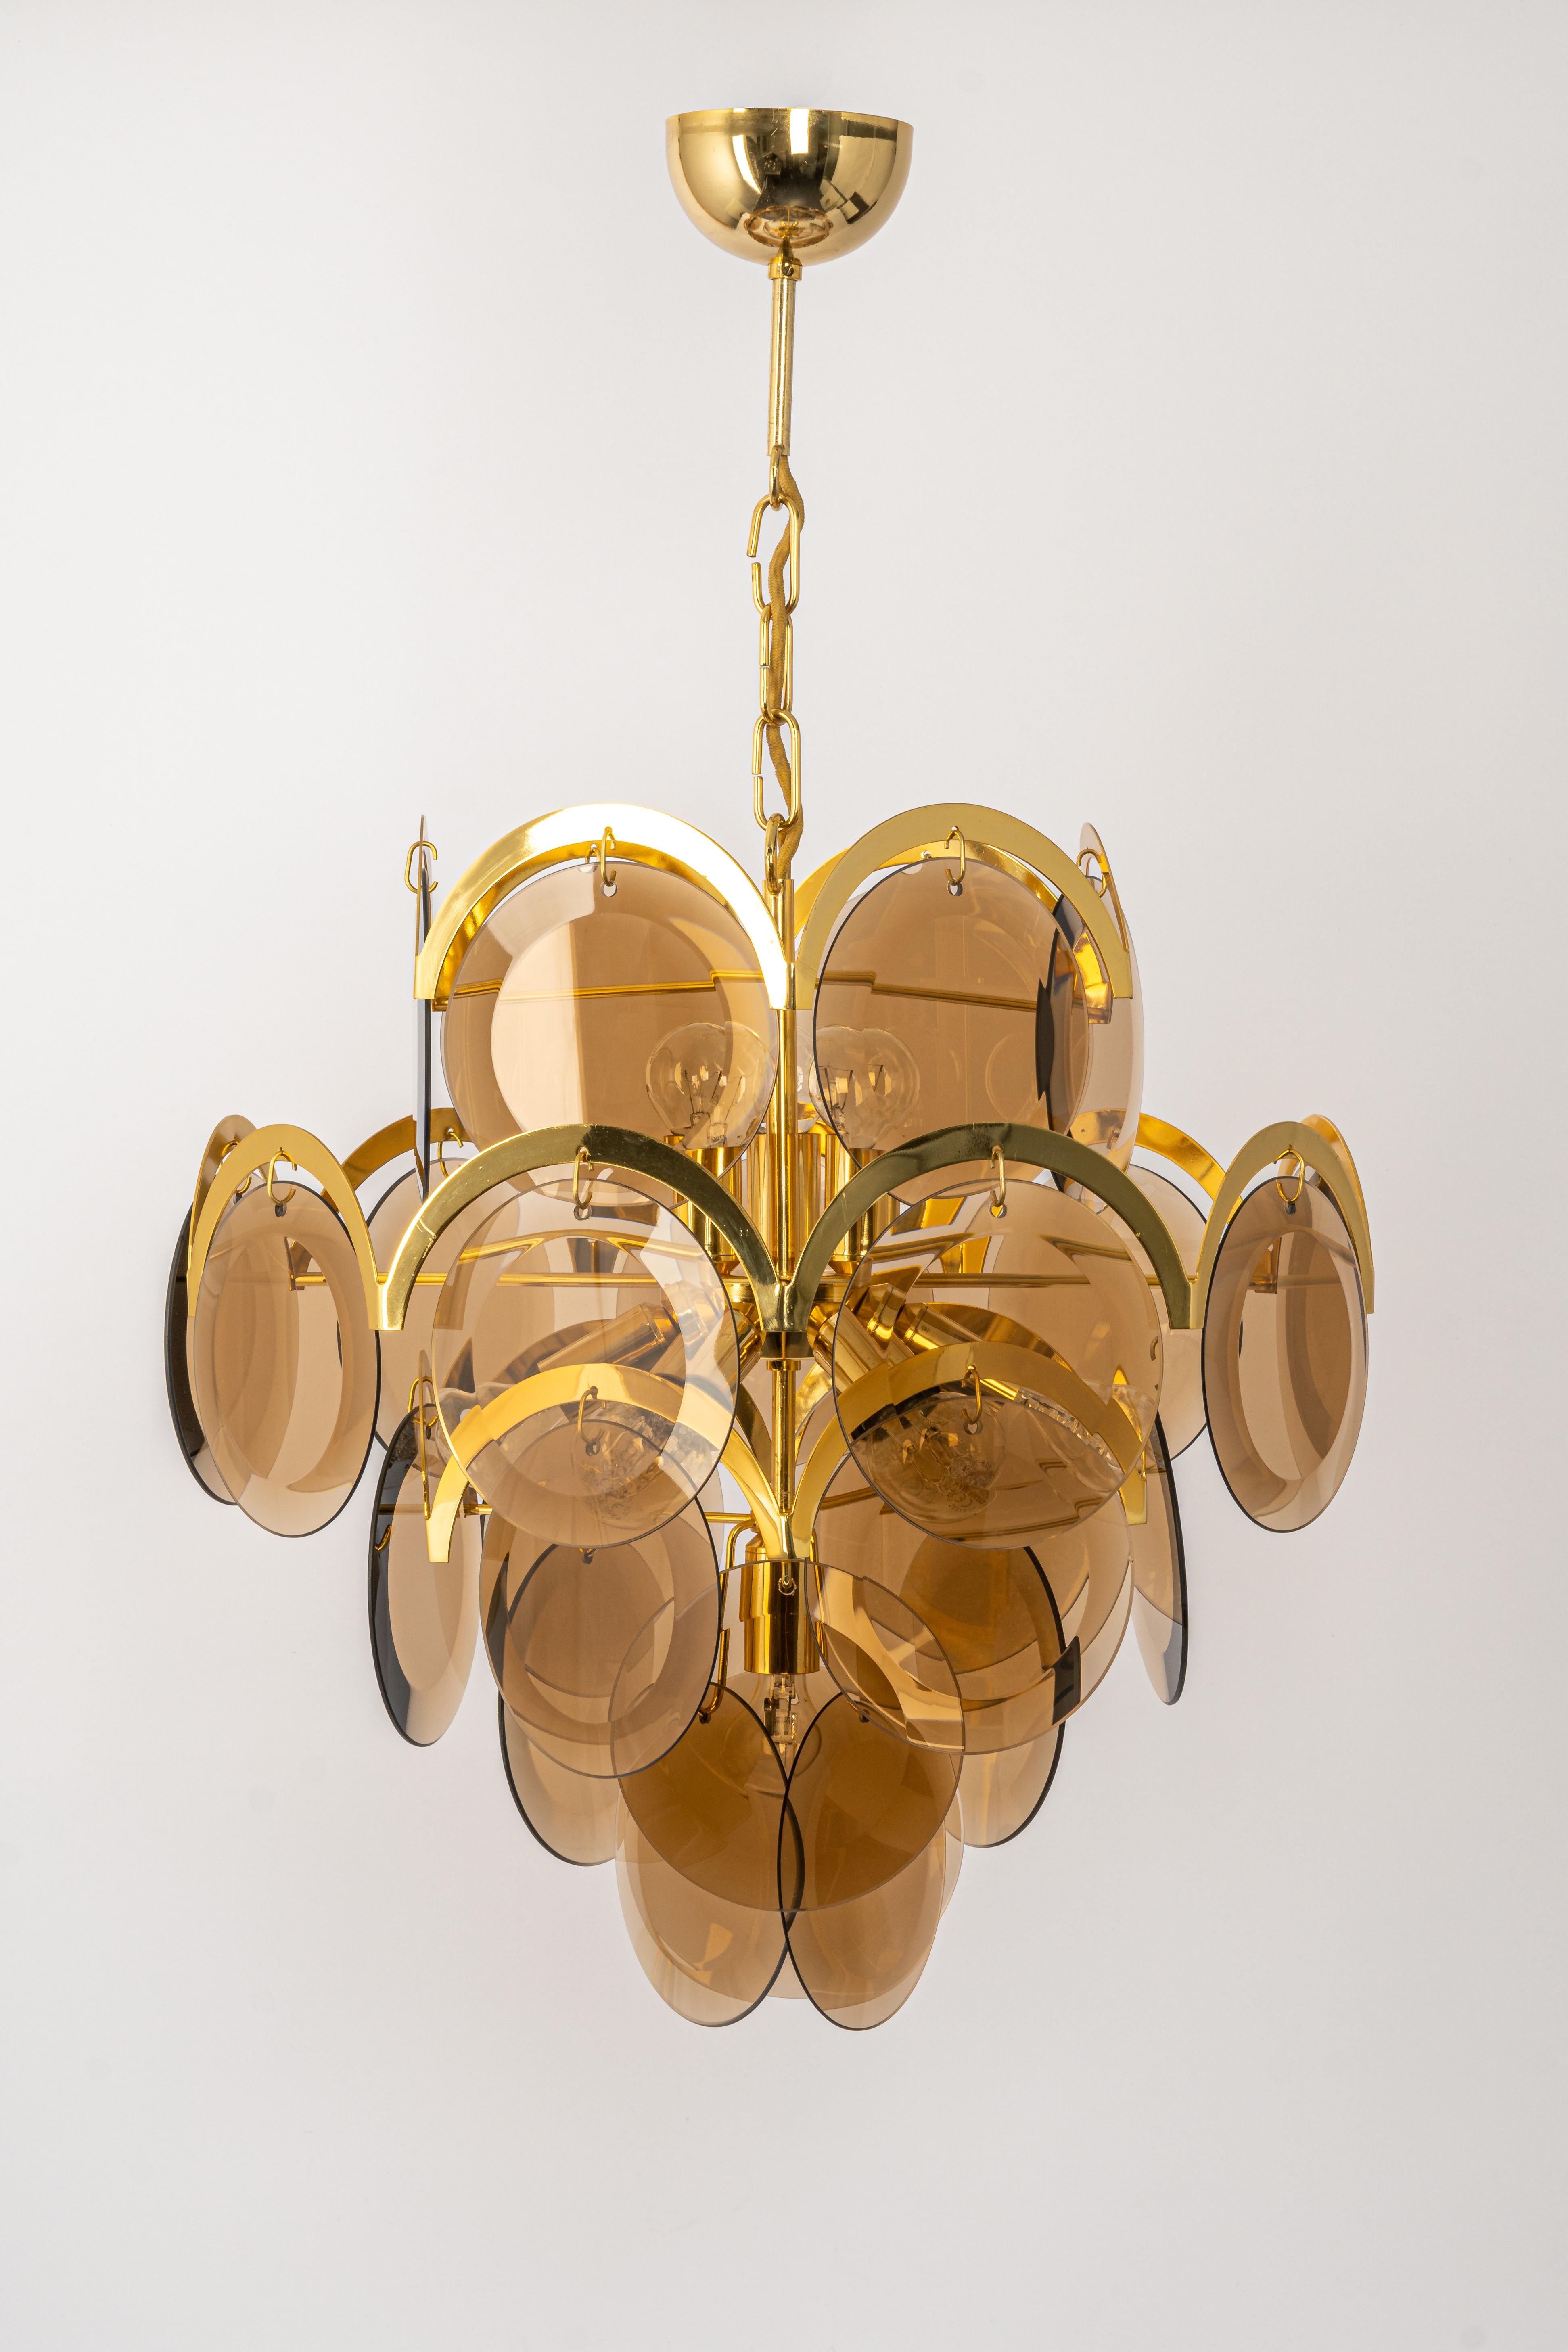 A stunning five-tier chandelier by Vistosi, Italy, manufactured in, circa 1960-1969
High quality and in very good condition. Cleaned, well-wired and ready to use. 
The fixture requires 10 x E14 standard bulbs with 40W max each 
Light bulbs are